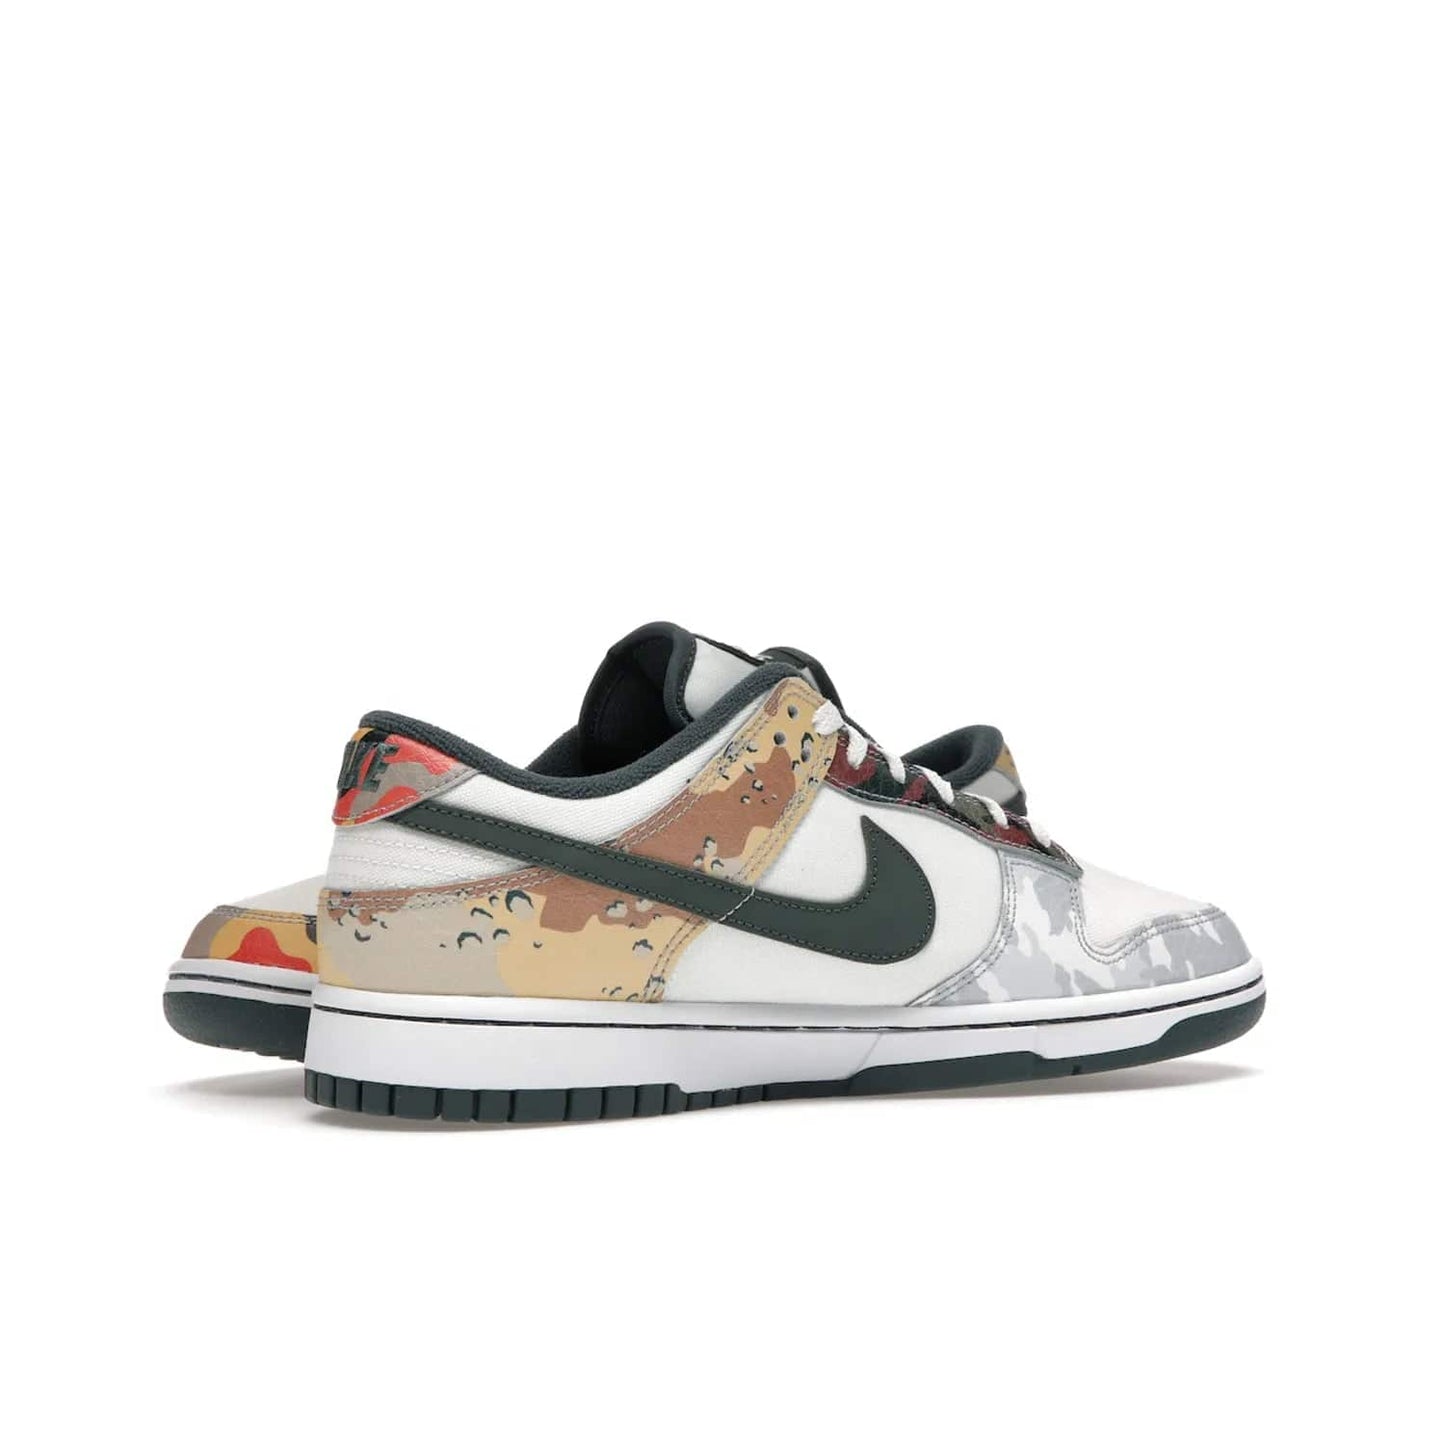 Nike Dunk Low SE Sail Multi-Camo - Image 16 - Only at www.BallersClubKickz.com - Classic design meets statement style in the Nike Dunk Low SE Sail Multi-Camo. White leather base with multi-color camo overlays, vibrant Nike Swooshes, and orange Nike embroidery. Get yours August 2021.